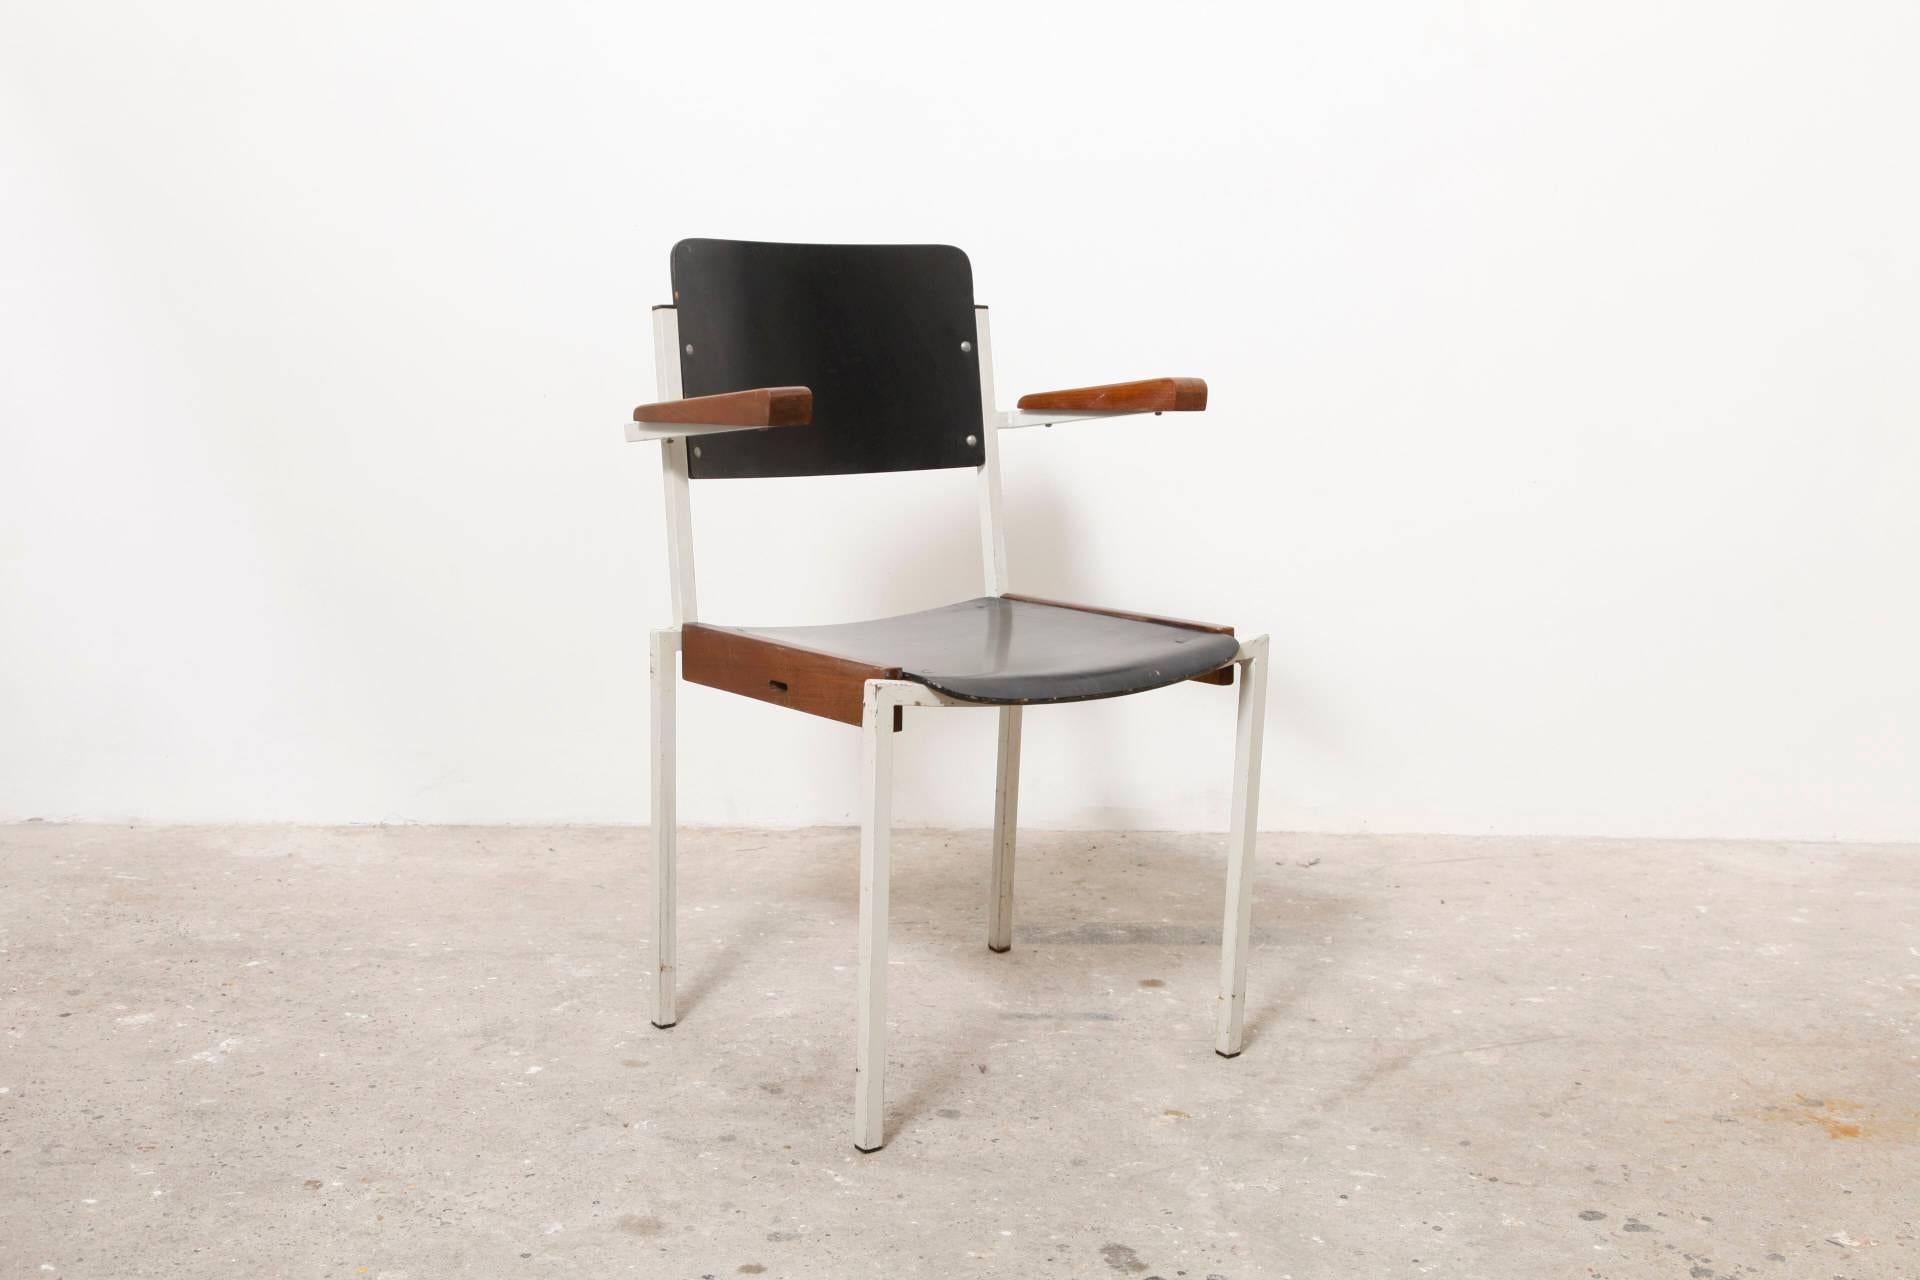 These chairs designed by W H. Gispen and were made in the 1950s for Riemersma.
 
The backs of the chairs are made of black lacquered wood, the arm-rests are naturally teakwood and have a rough patina look, the frame is enamelled metal, executed in a